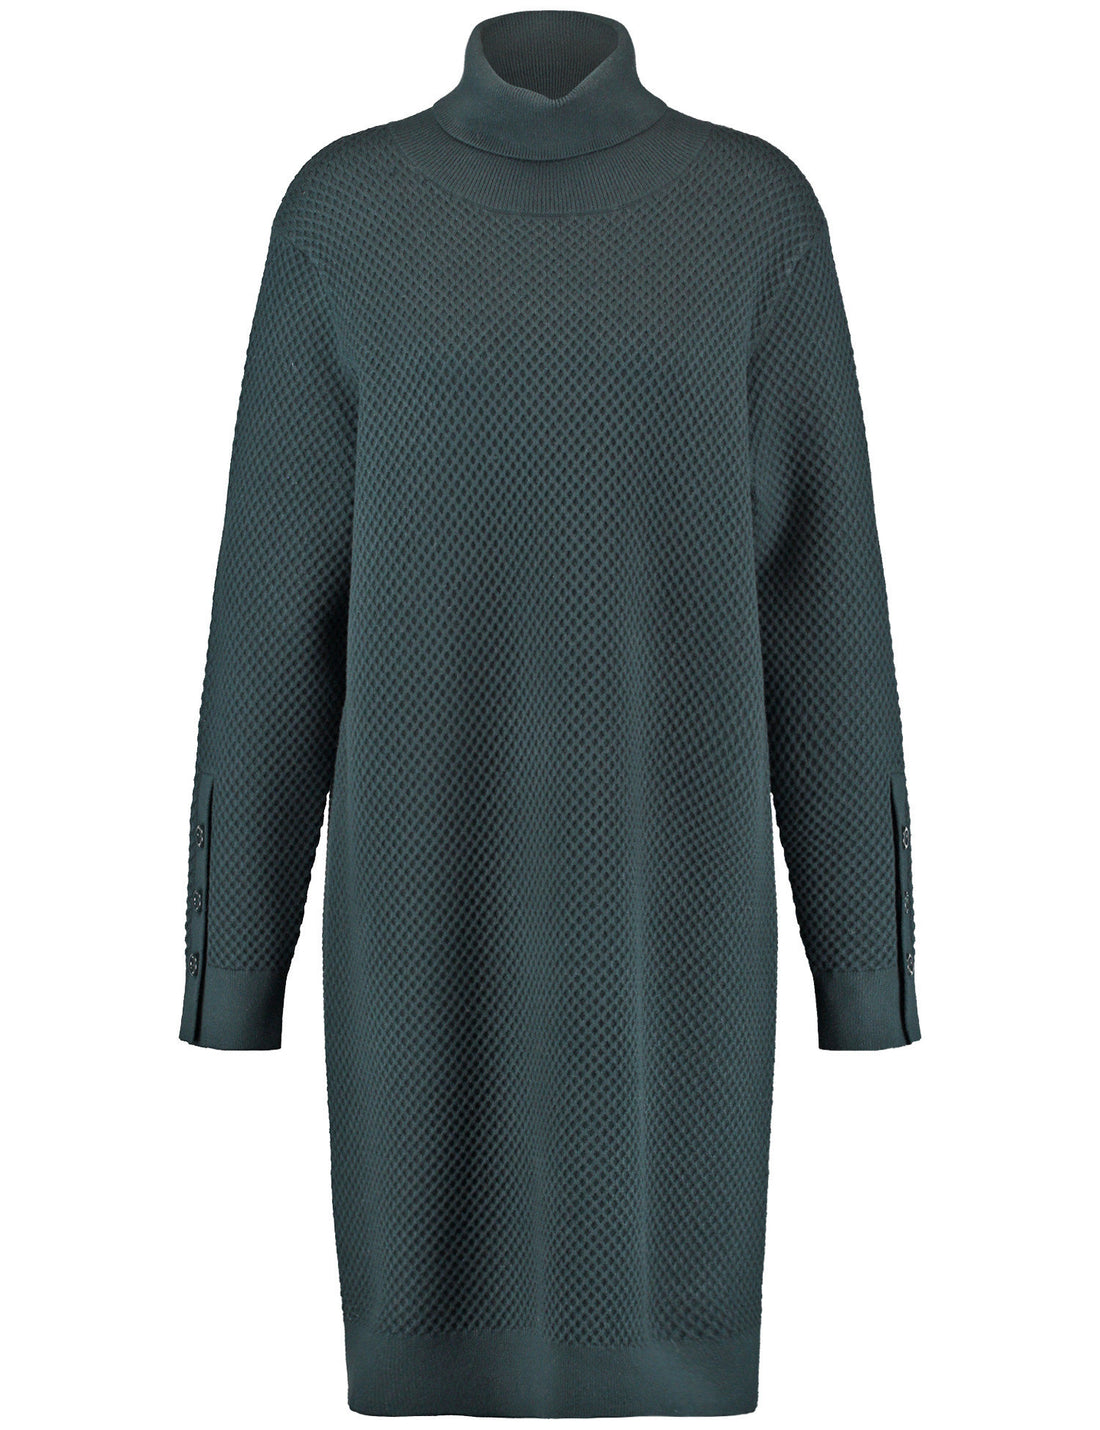 Knit Dress With A Polo Collar And A Button Detail On The Sleeves_280106-35713_50939_02